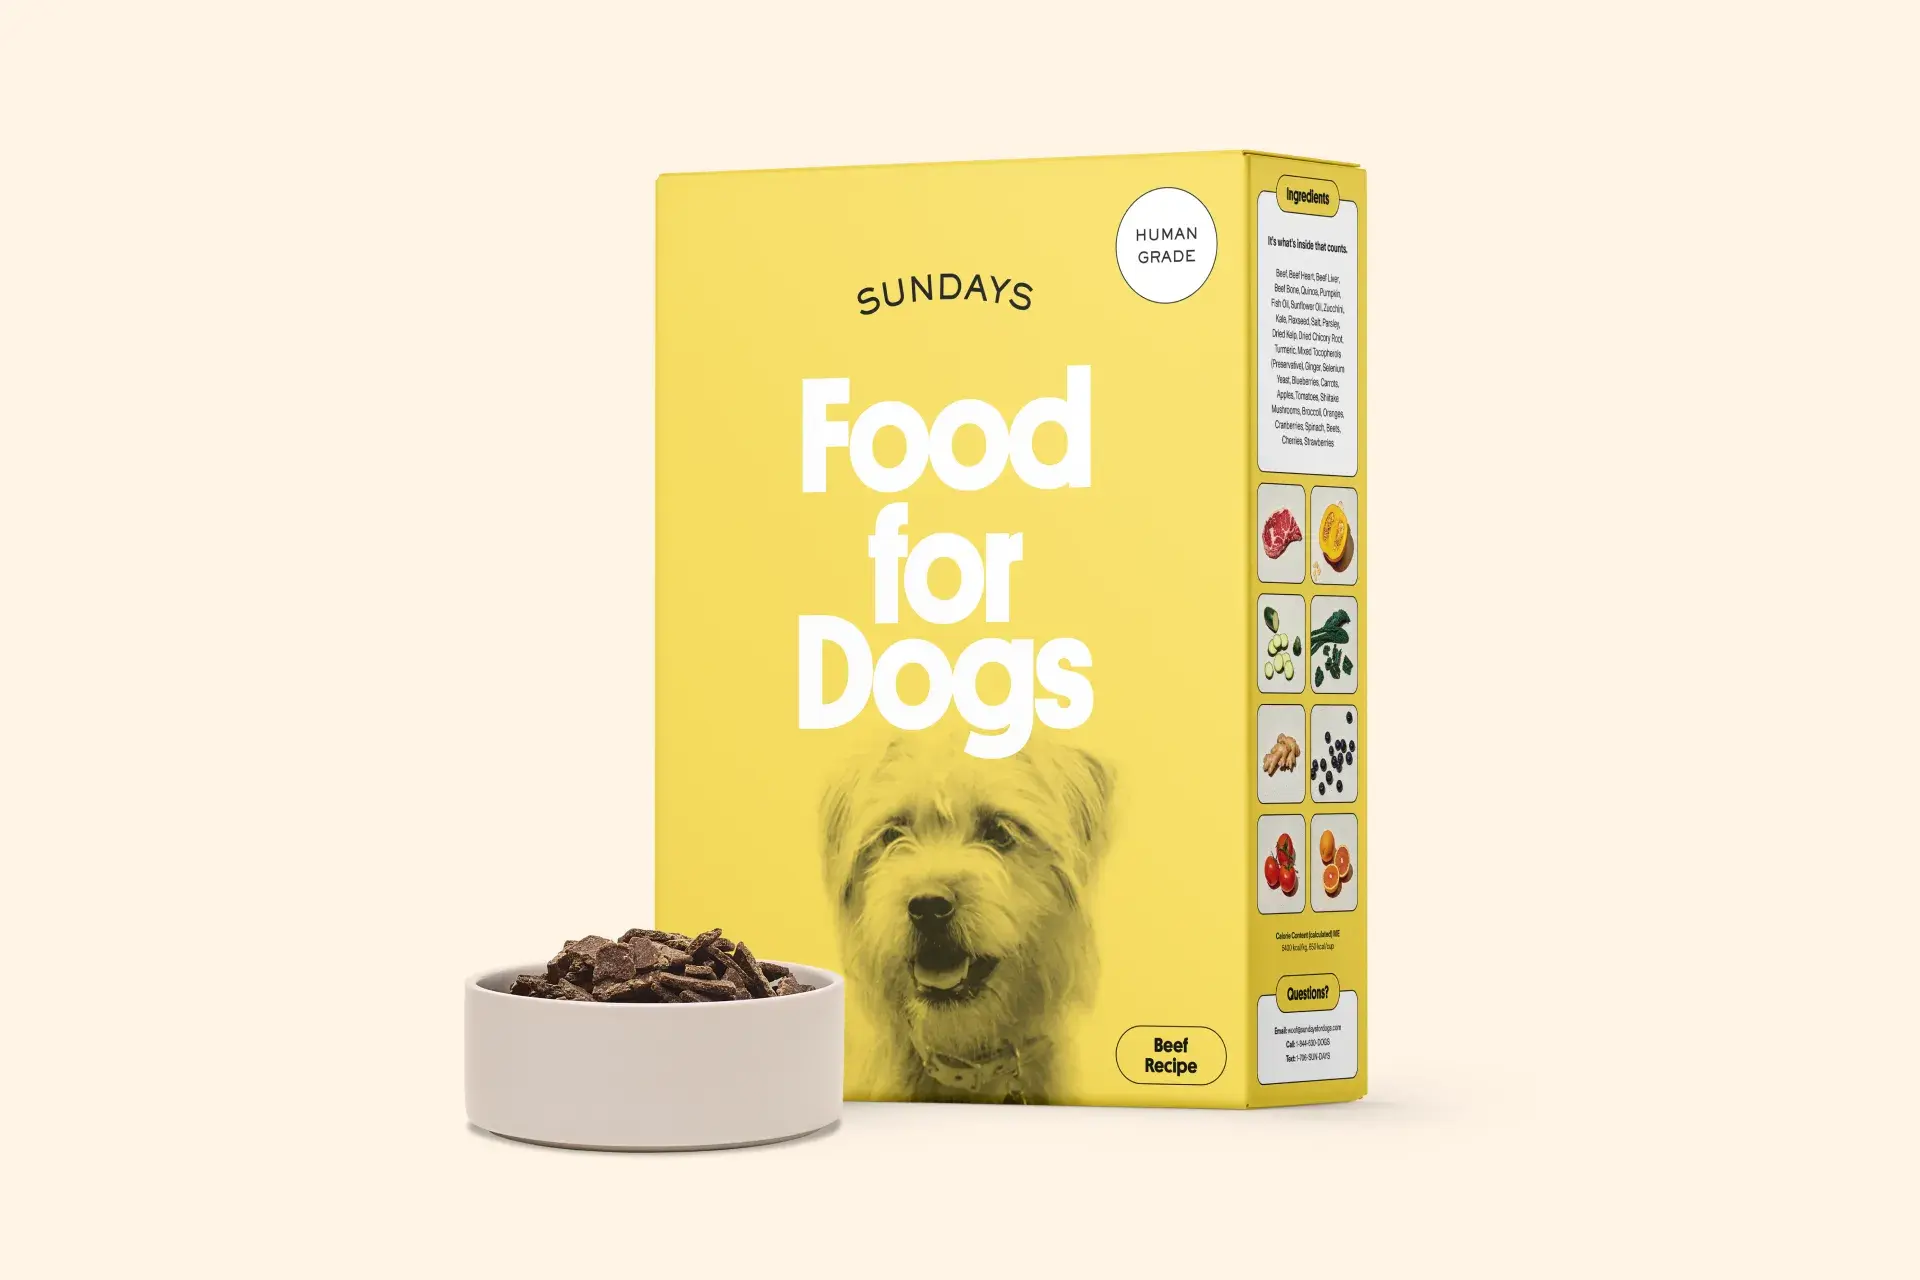 Sundays for Dogs yellow box and bowl full of beef dog food